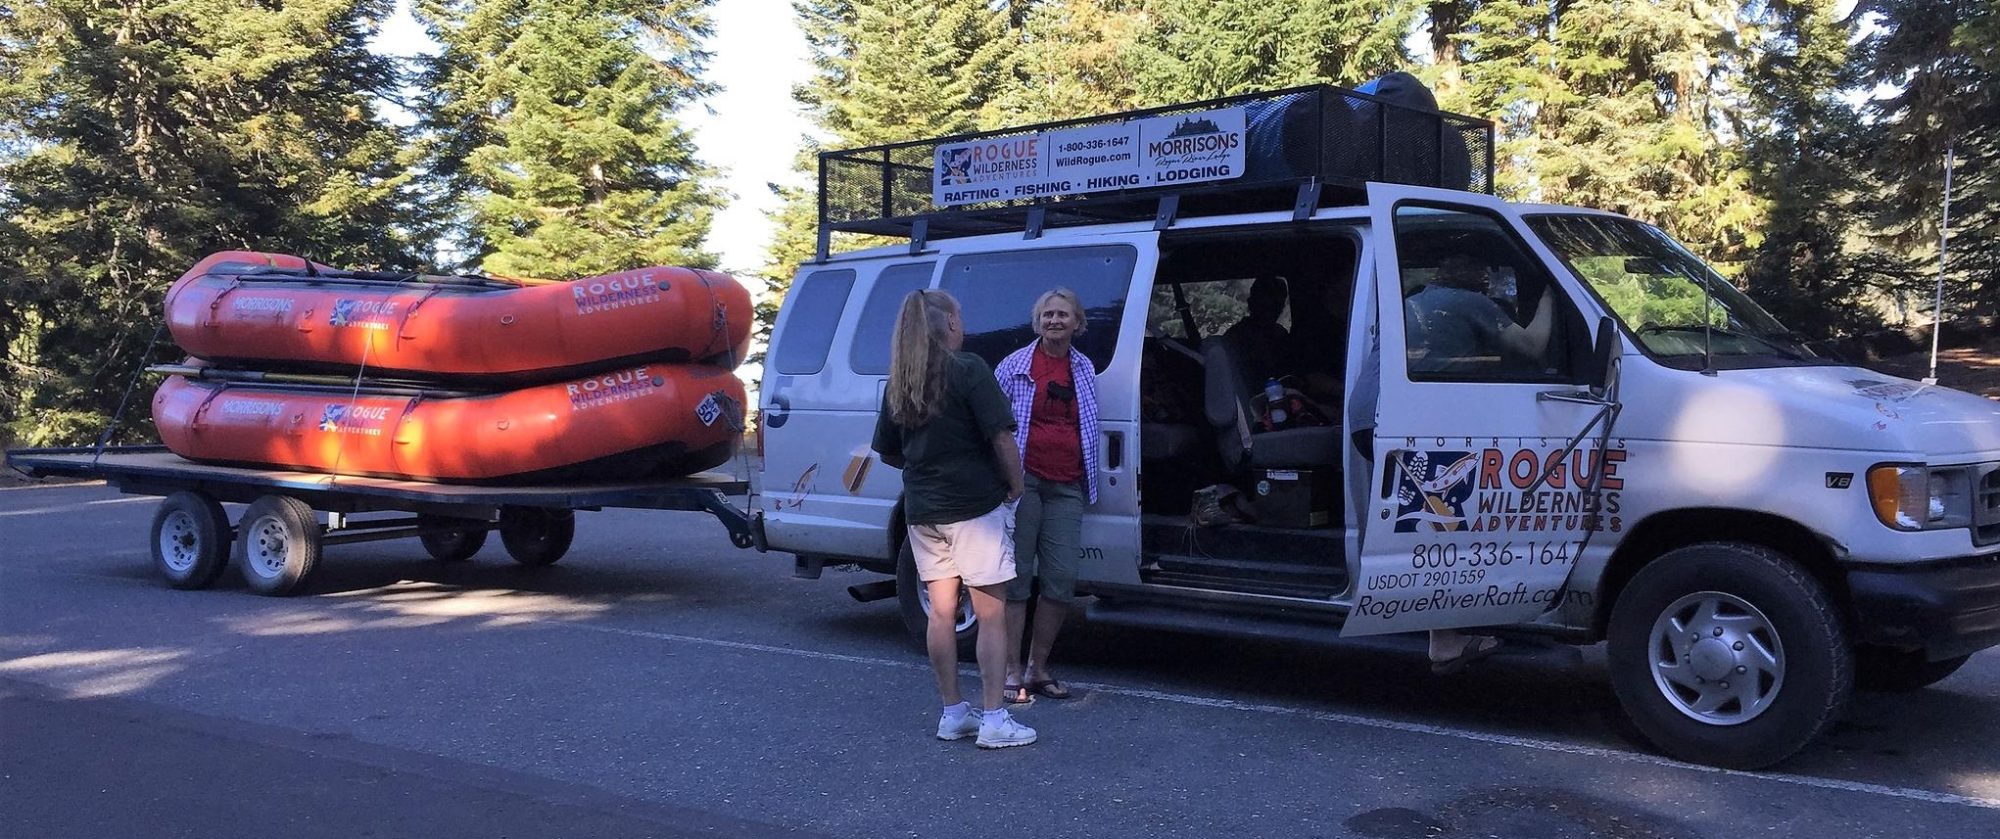 Rogue River Wild & Scenic Rafting and Trail Hiking Shuttles